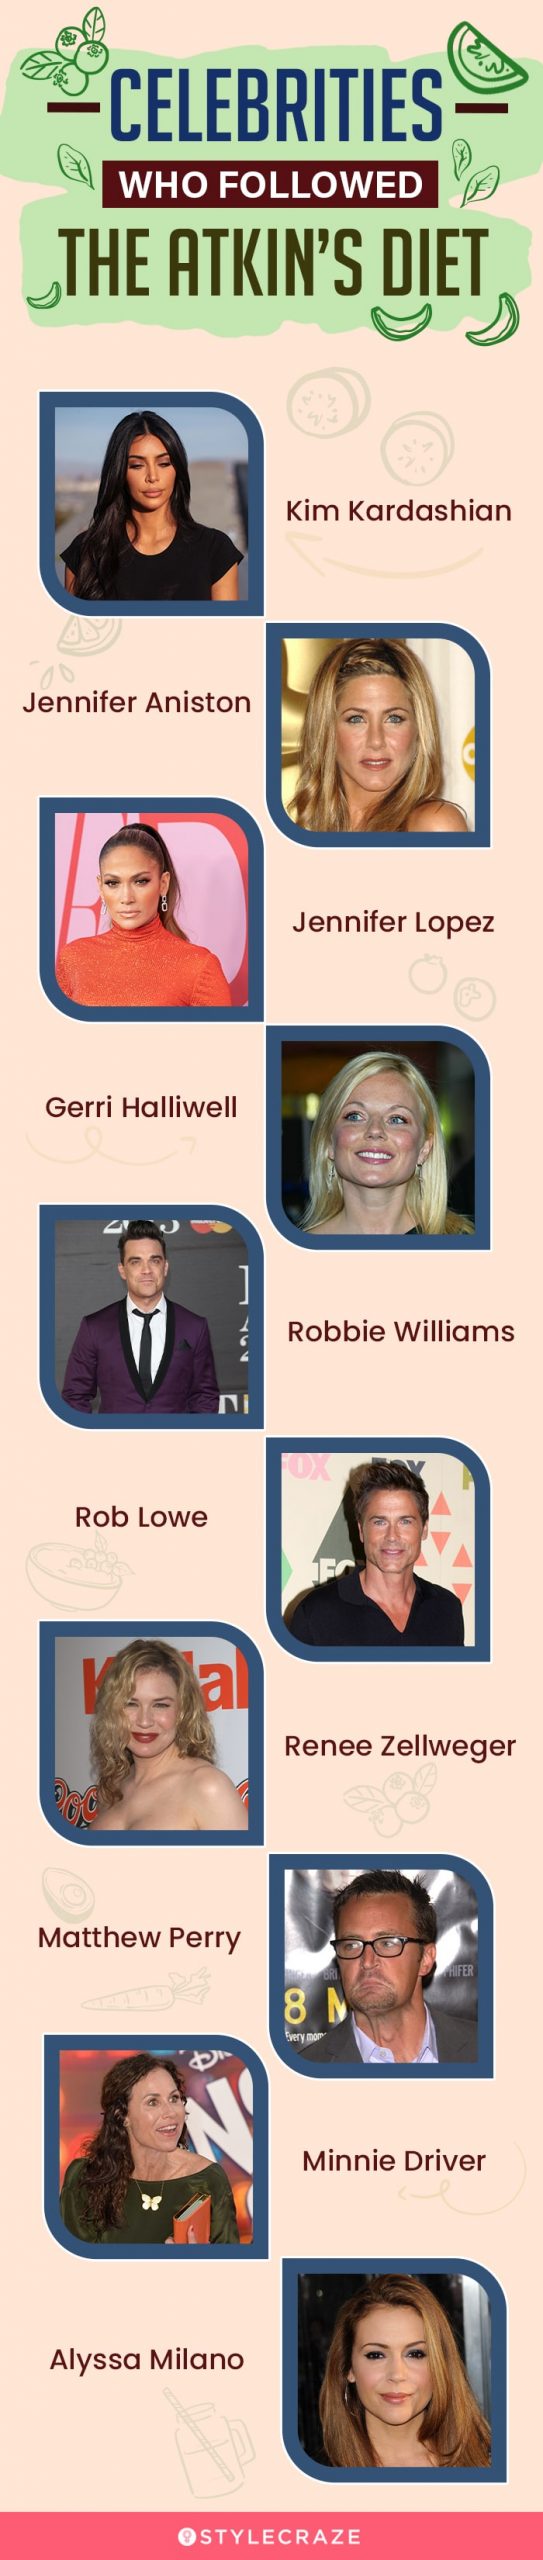 celebrities who followed the atkin’s diet (infographic)